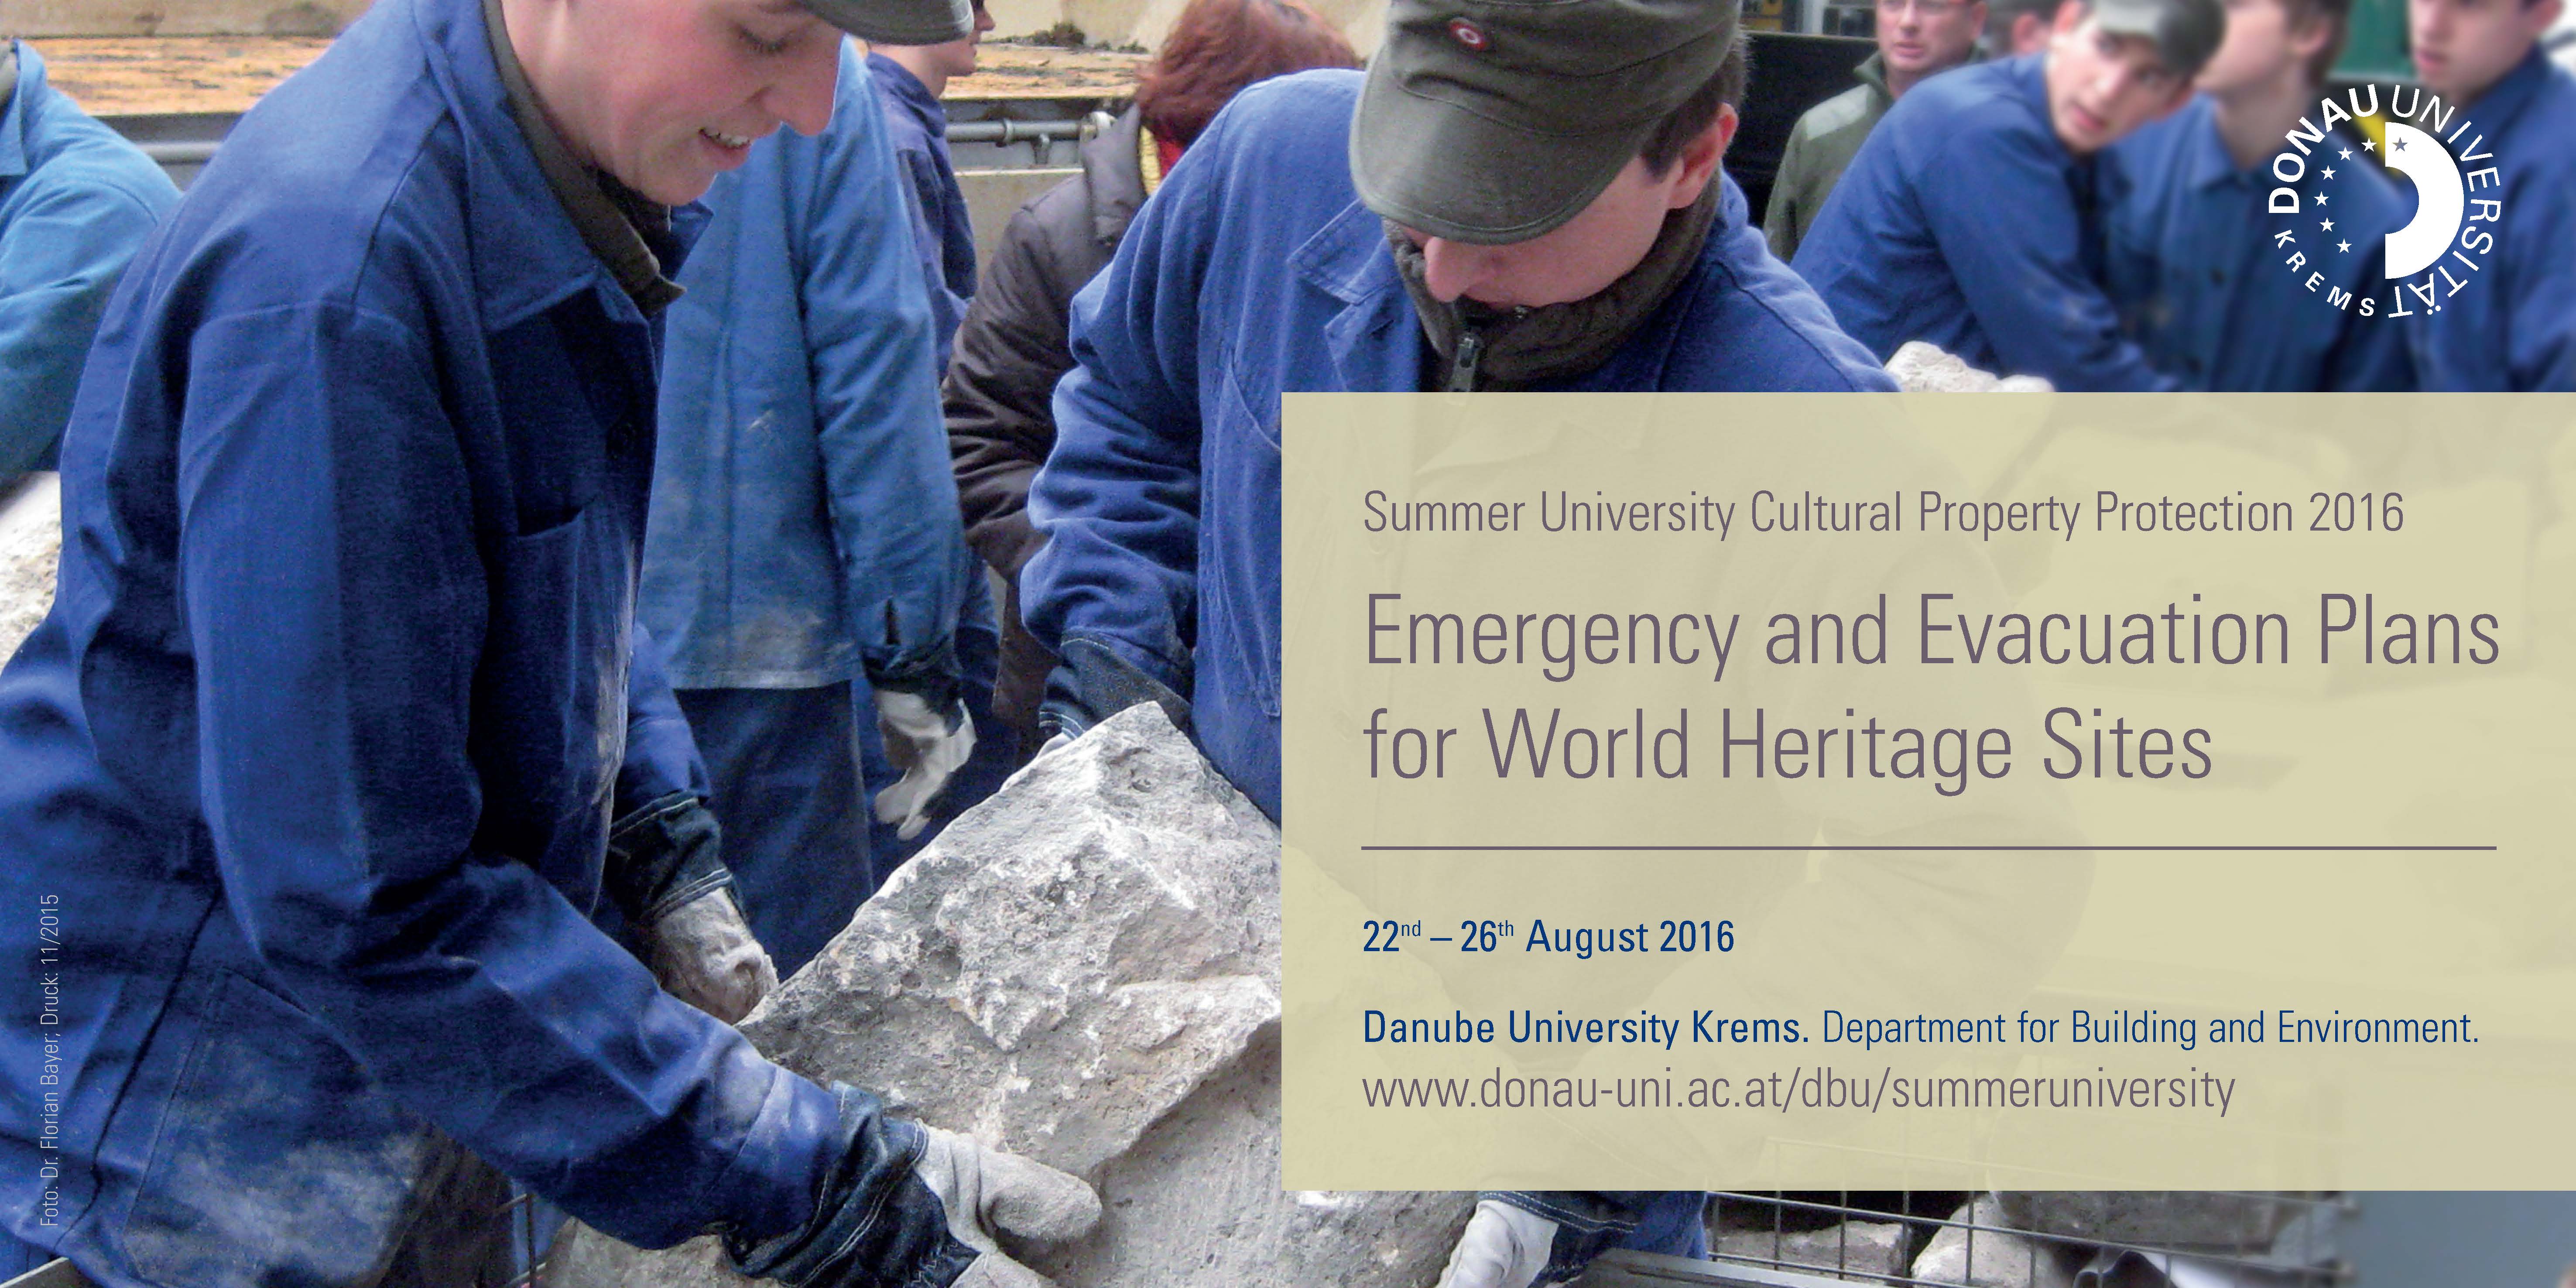 Summer School Emergency and Evacuation Plans for World Heritage Sites 2016